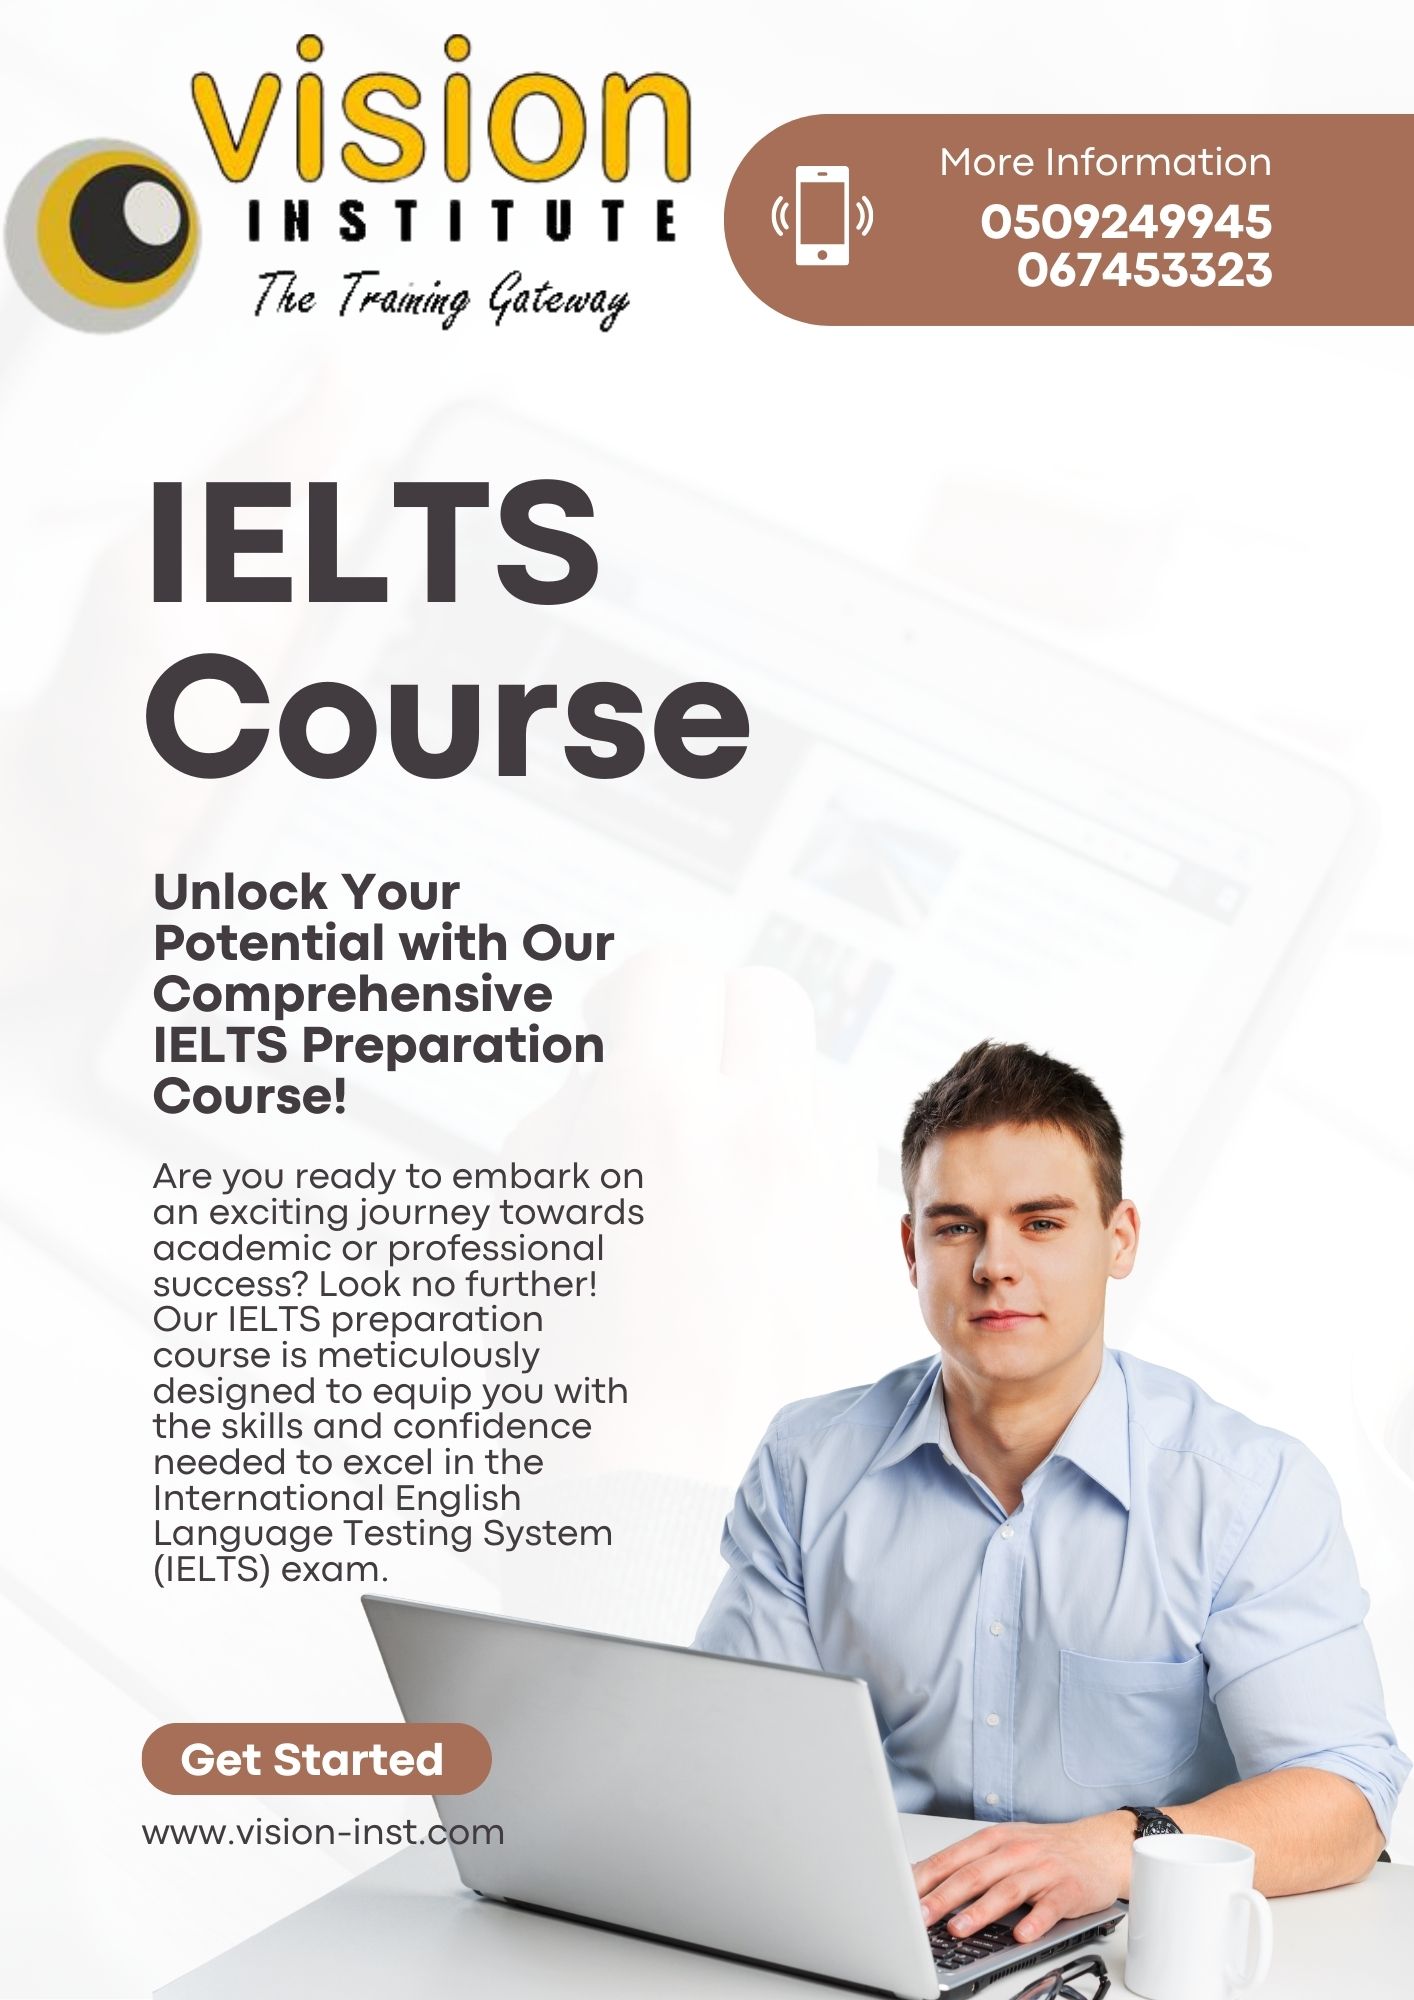 IELTS Preparation Classes at Vision Institute. Call 0509249945